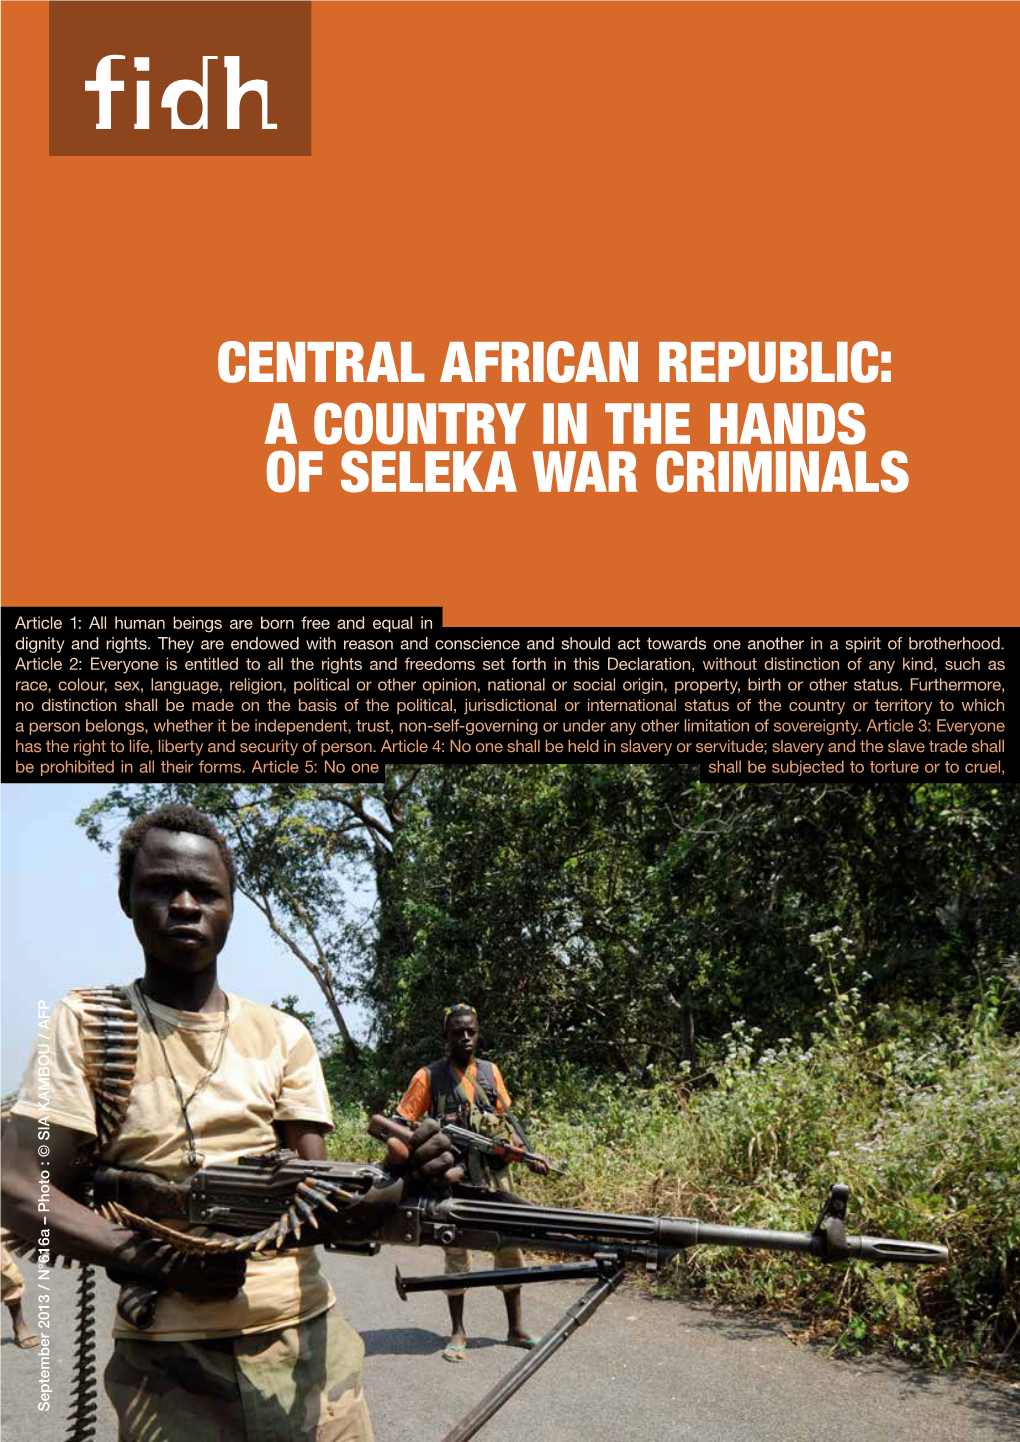 Central African Republic: a Country in the Hands of Seleka War Criminals